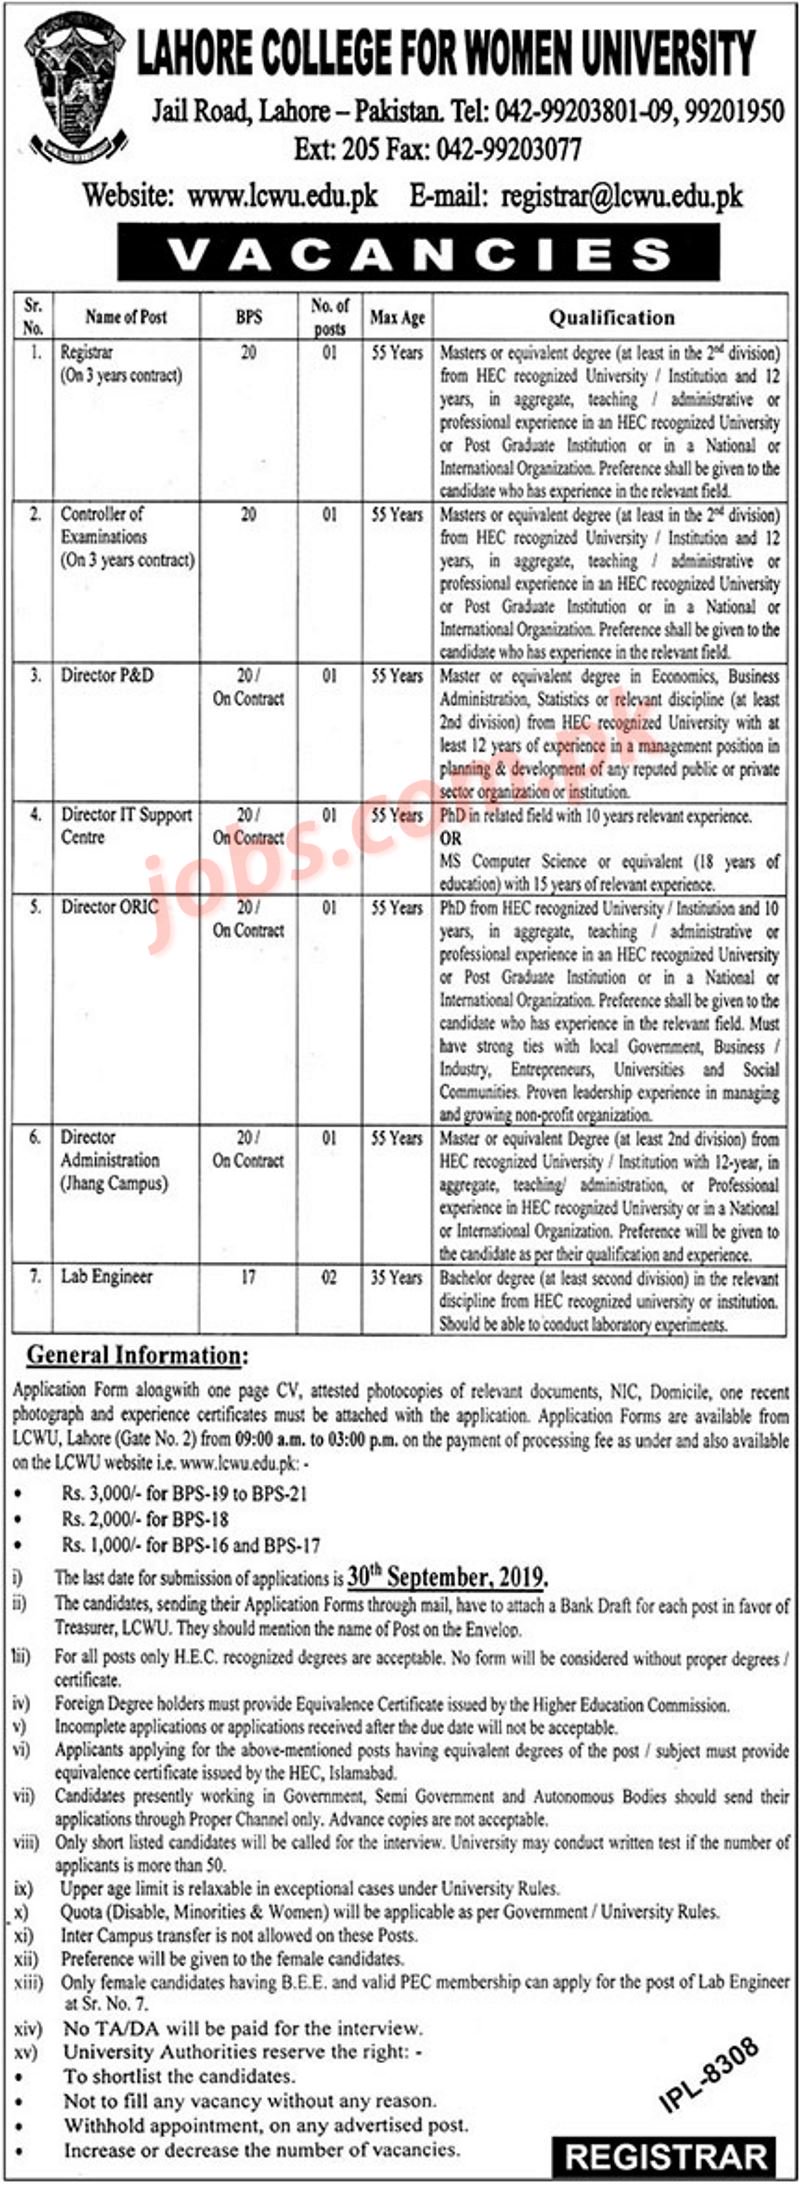 Lahore College for Women University (LCWU) Jobs 2019 for Lab Engineers, Registrar, Controller of Exams & Directors